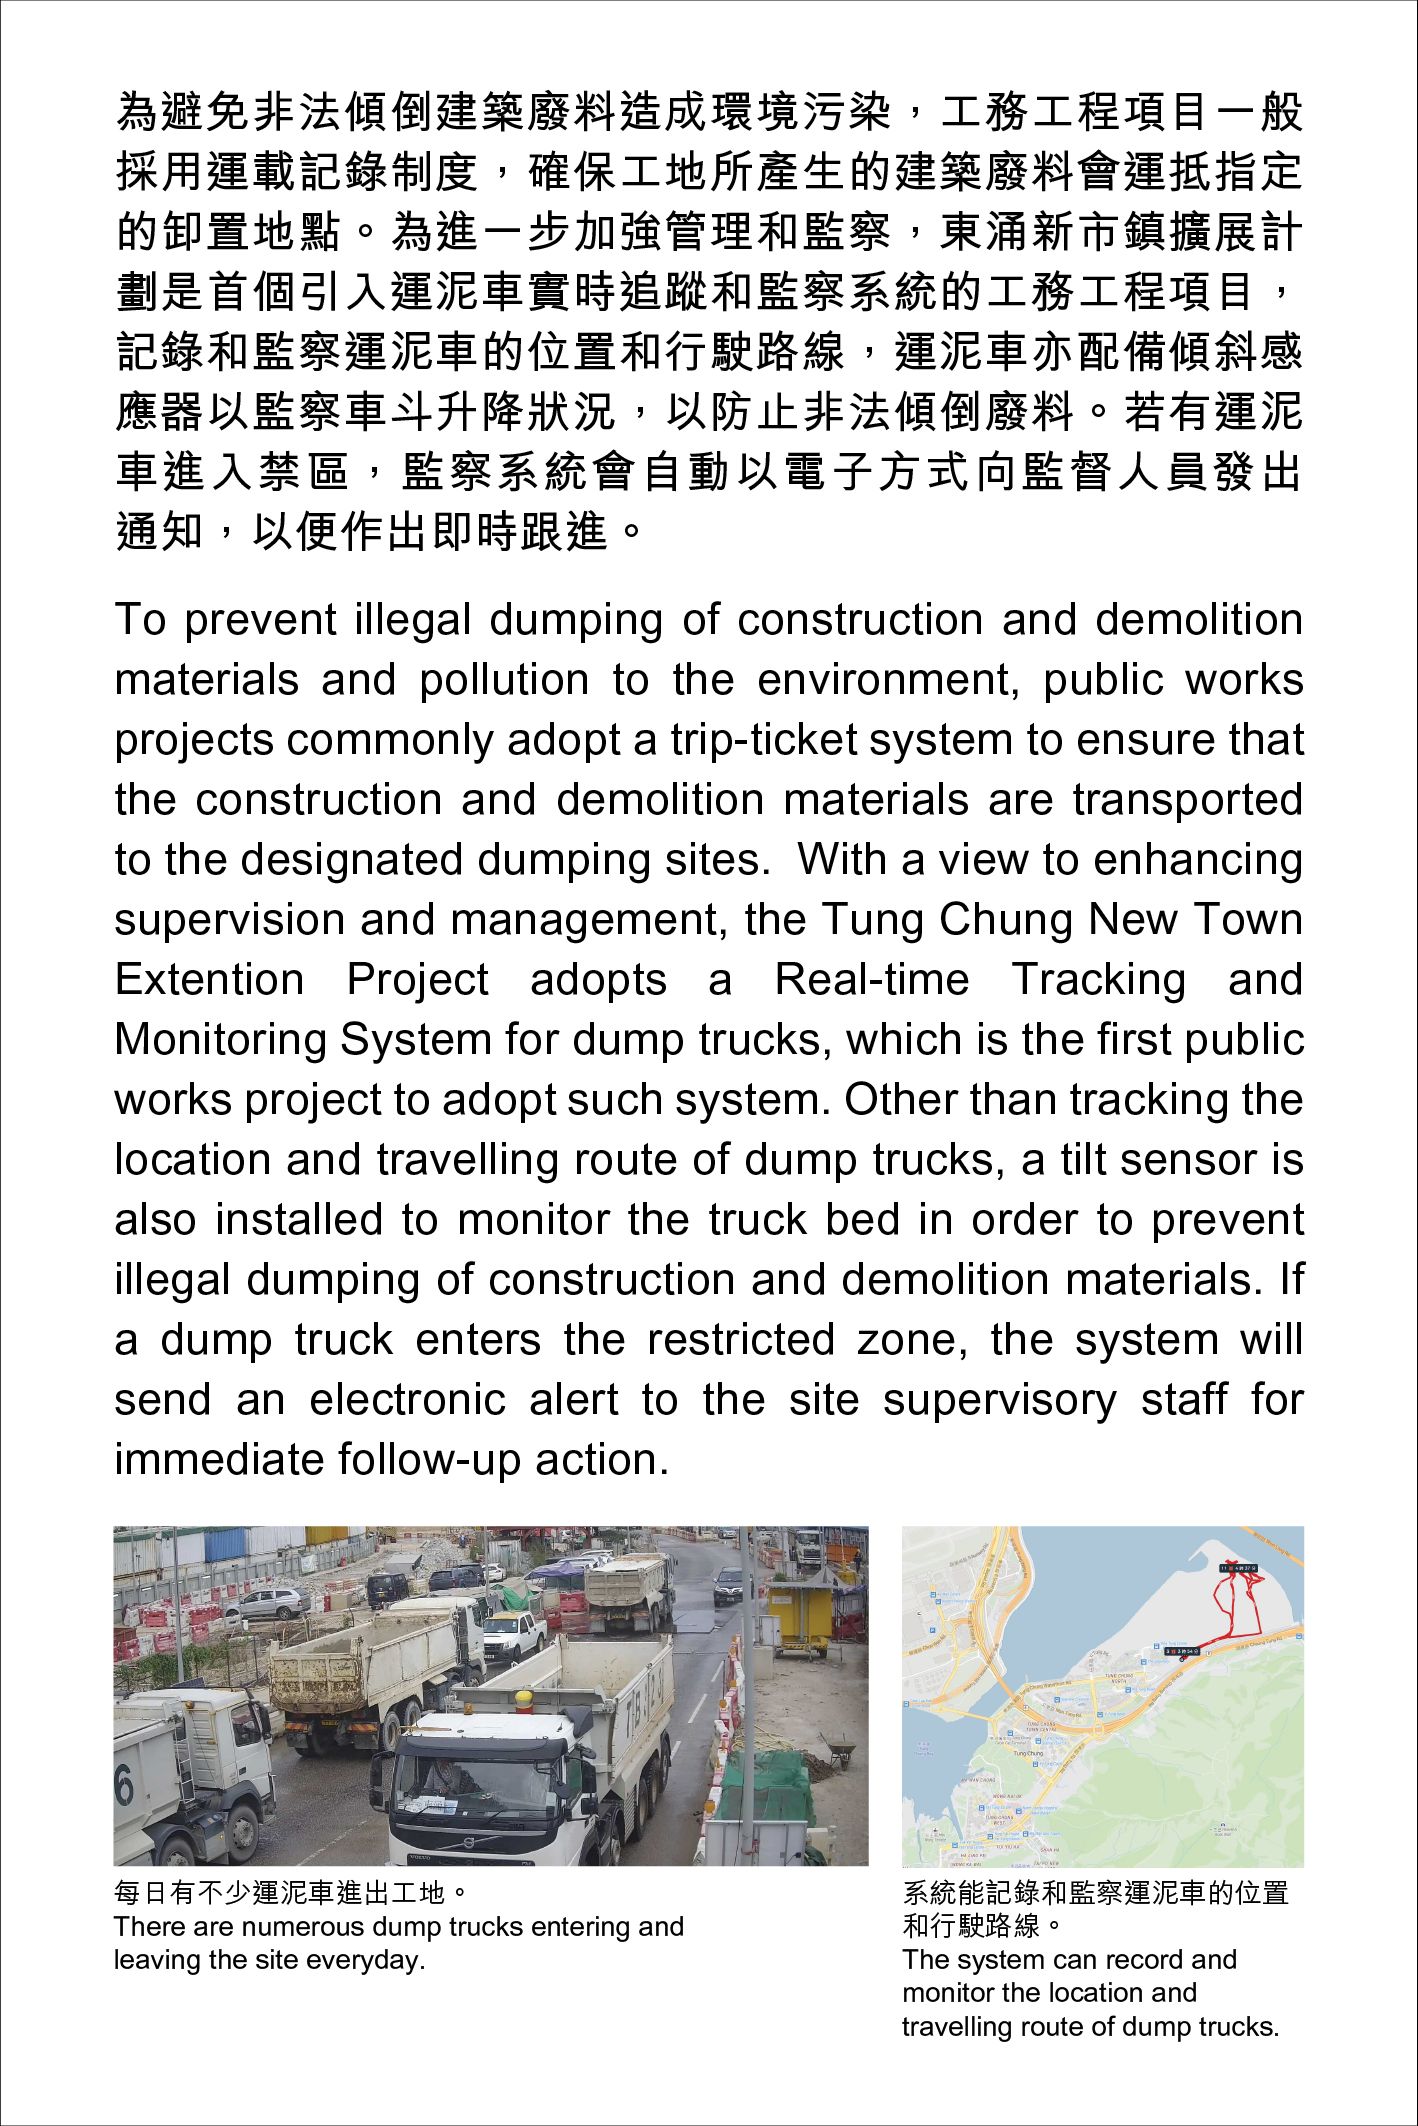 To prevent illegal dumping of construction and demolition materials and pollution to the environment, public works projects commonly adopt a trip-ticket system to ensure that the construction and demolition materials are transported to the designated dumping sites.  With a view to enhancing supervision and management, the Tung Chung New Town Extention Project adopts a Real-time Tracking and Monitoring System for dump trucks, which is the first public works project to adopt such system. Other than tracking the location and travelling route of dump trucks, a tilt sensor is also installed to monitor the truck bed in order to prevent illegal dumping of construction and demolition materials. If a dump truck enters the restricted zone, the system will send an electronic alert to the site supervisory staff for immediate follow-up action.